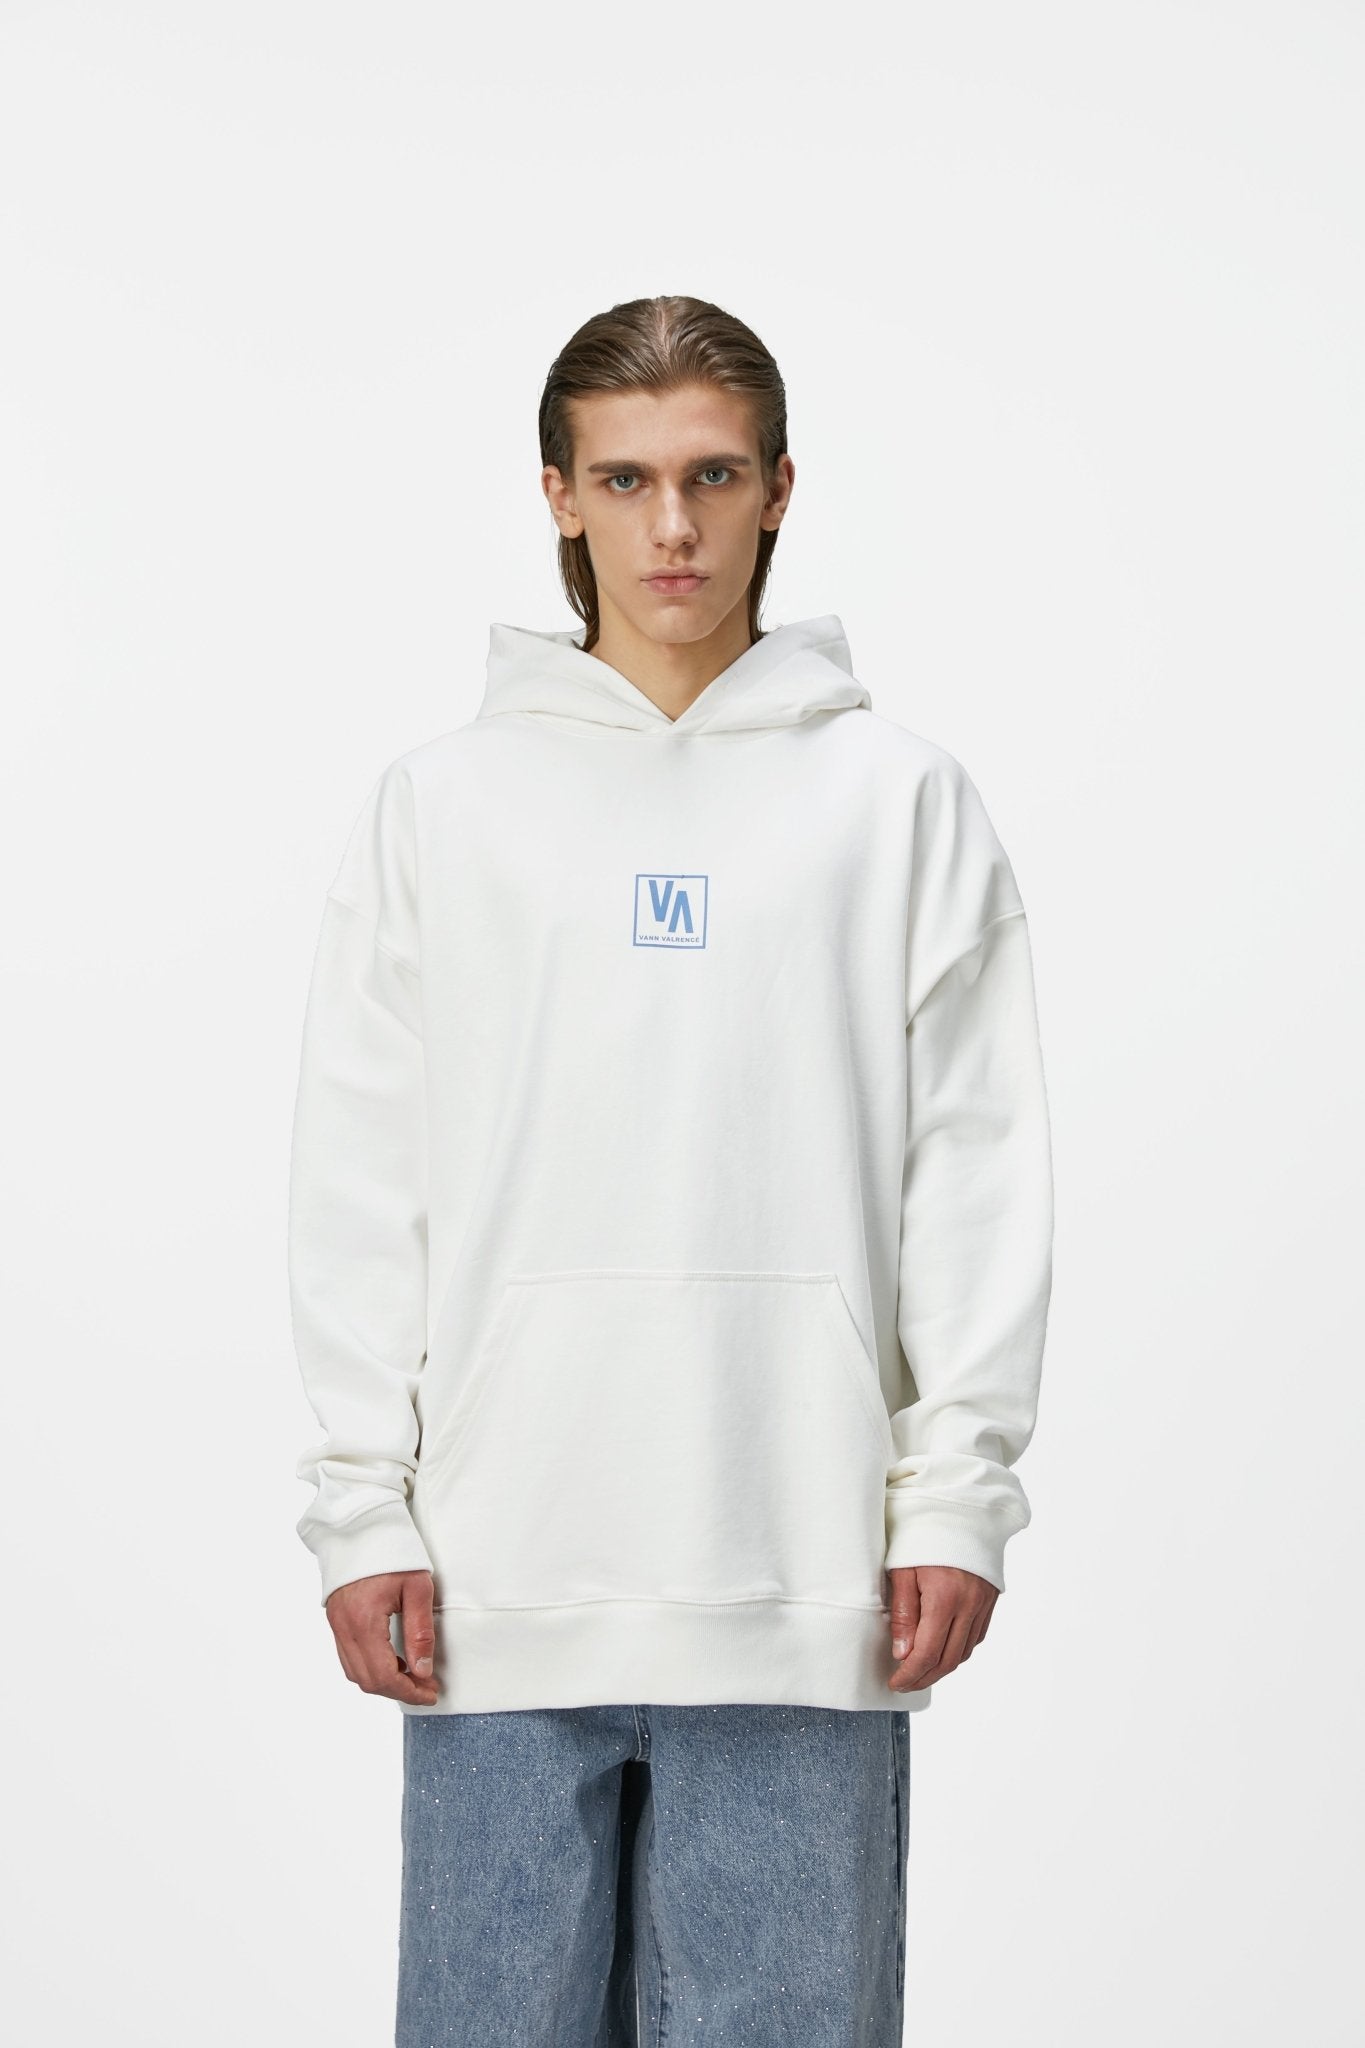 VANN VALRENCÉ White Structure Combination Hoodie & MADA IN CHINA